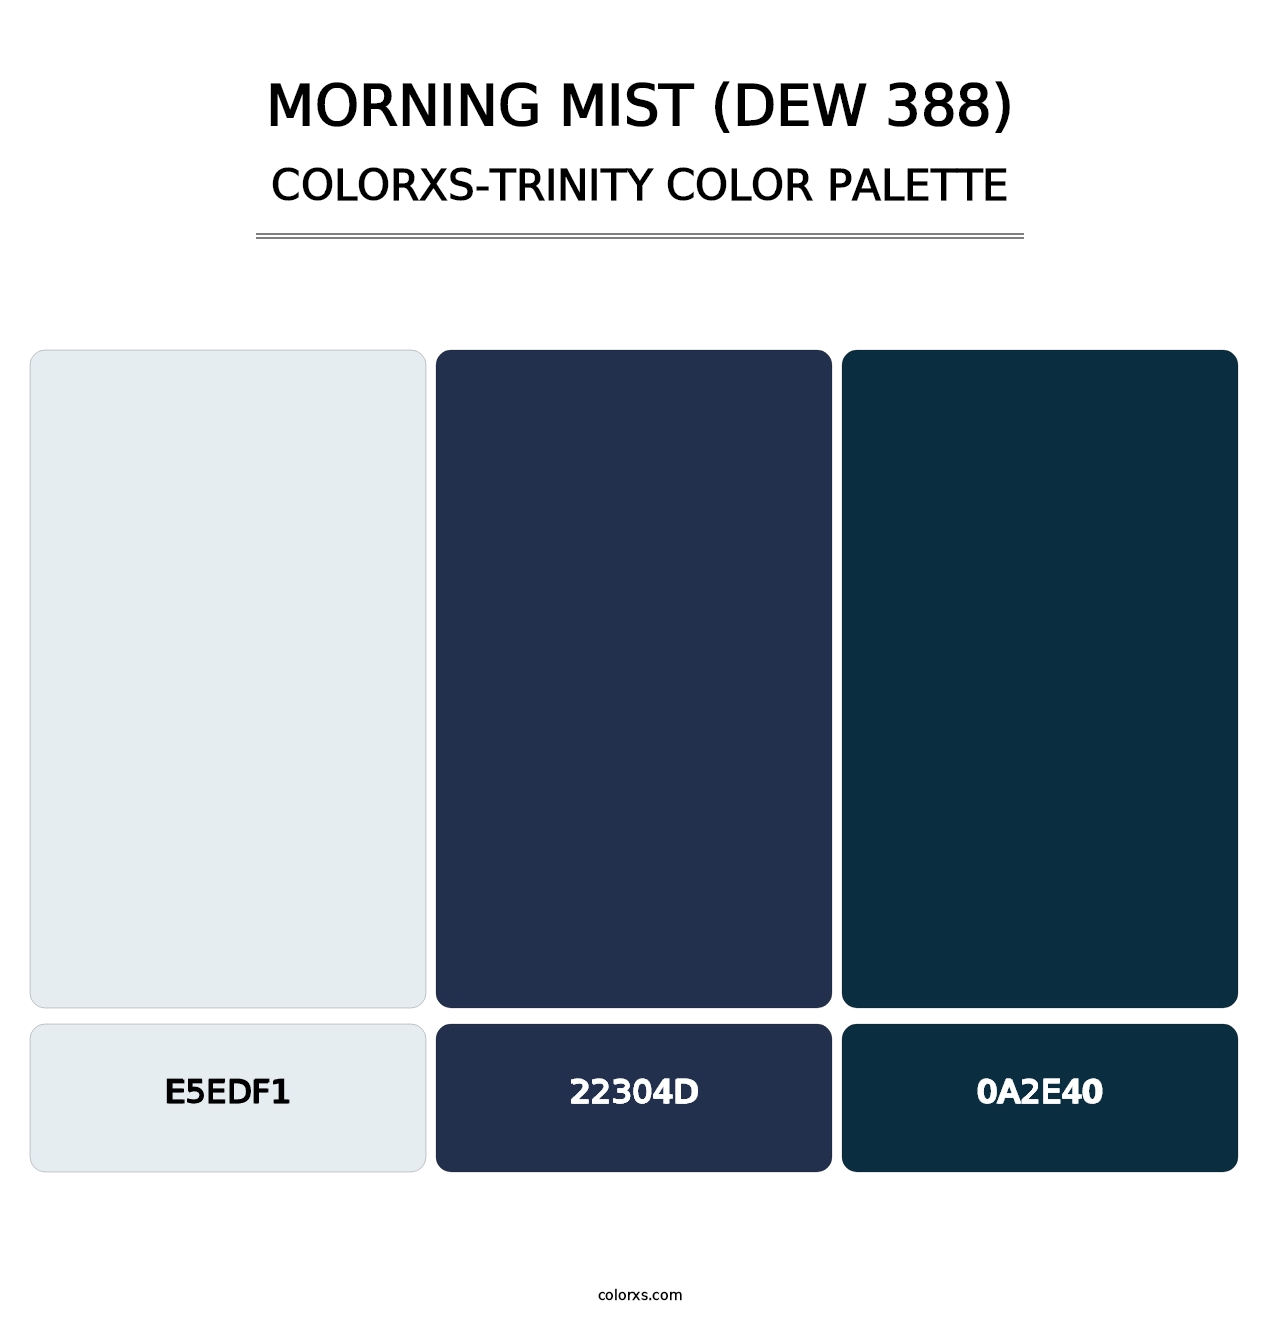 Morning Mist (DEW 388) - Colorxs Trinity Palette